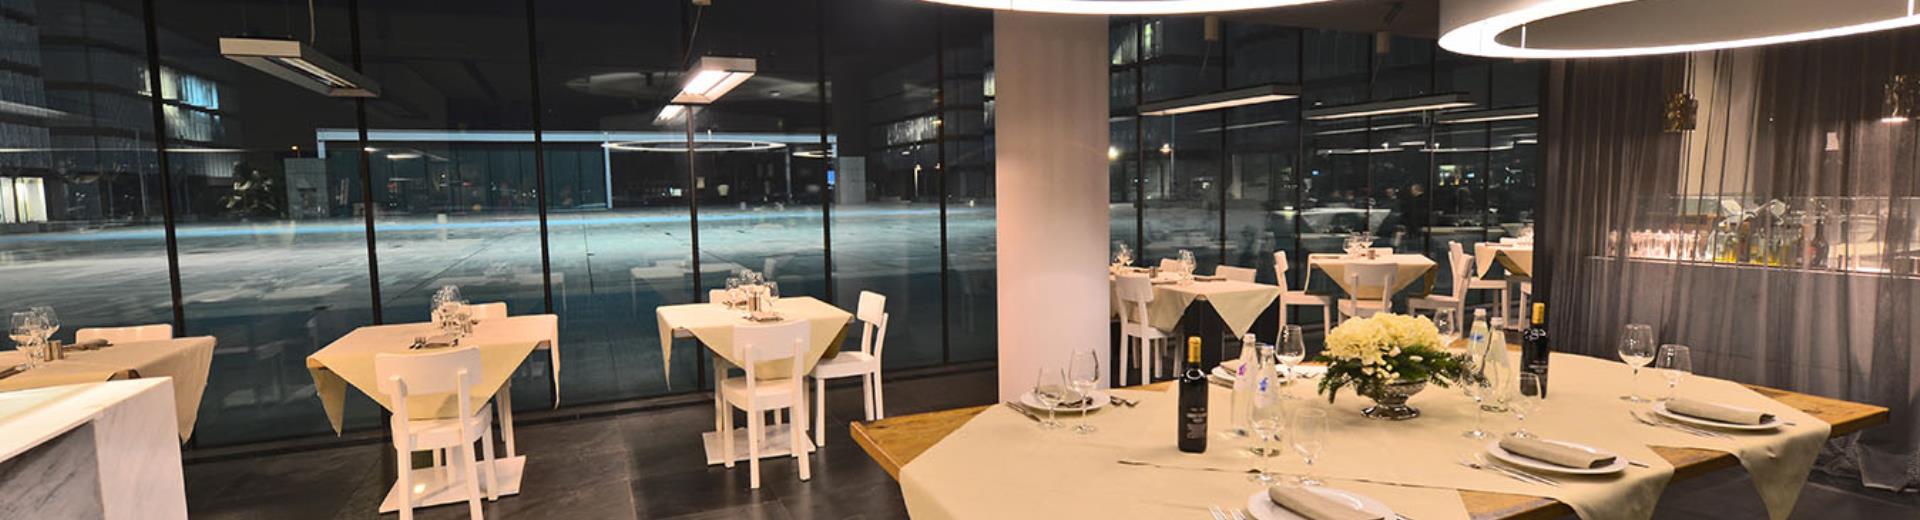 Discover the flavours of traditional local cuisine together with the best Italian and international cuisine: all this at BW Plus Net Tower Hotel in Padova!